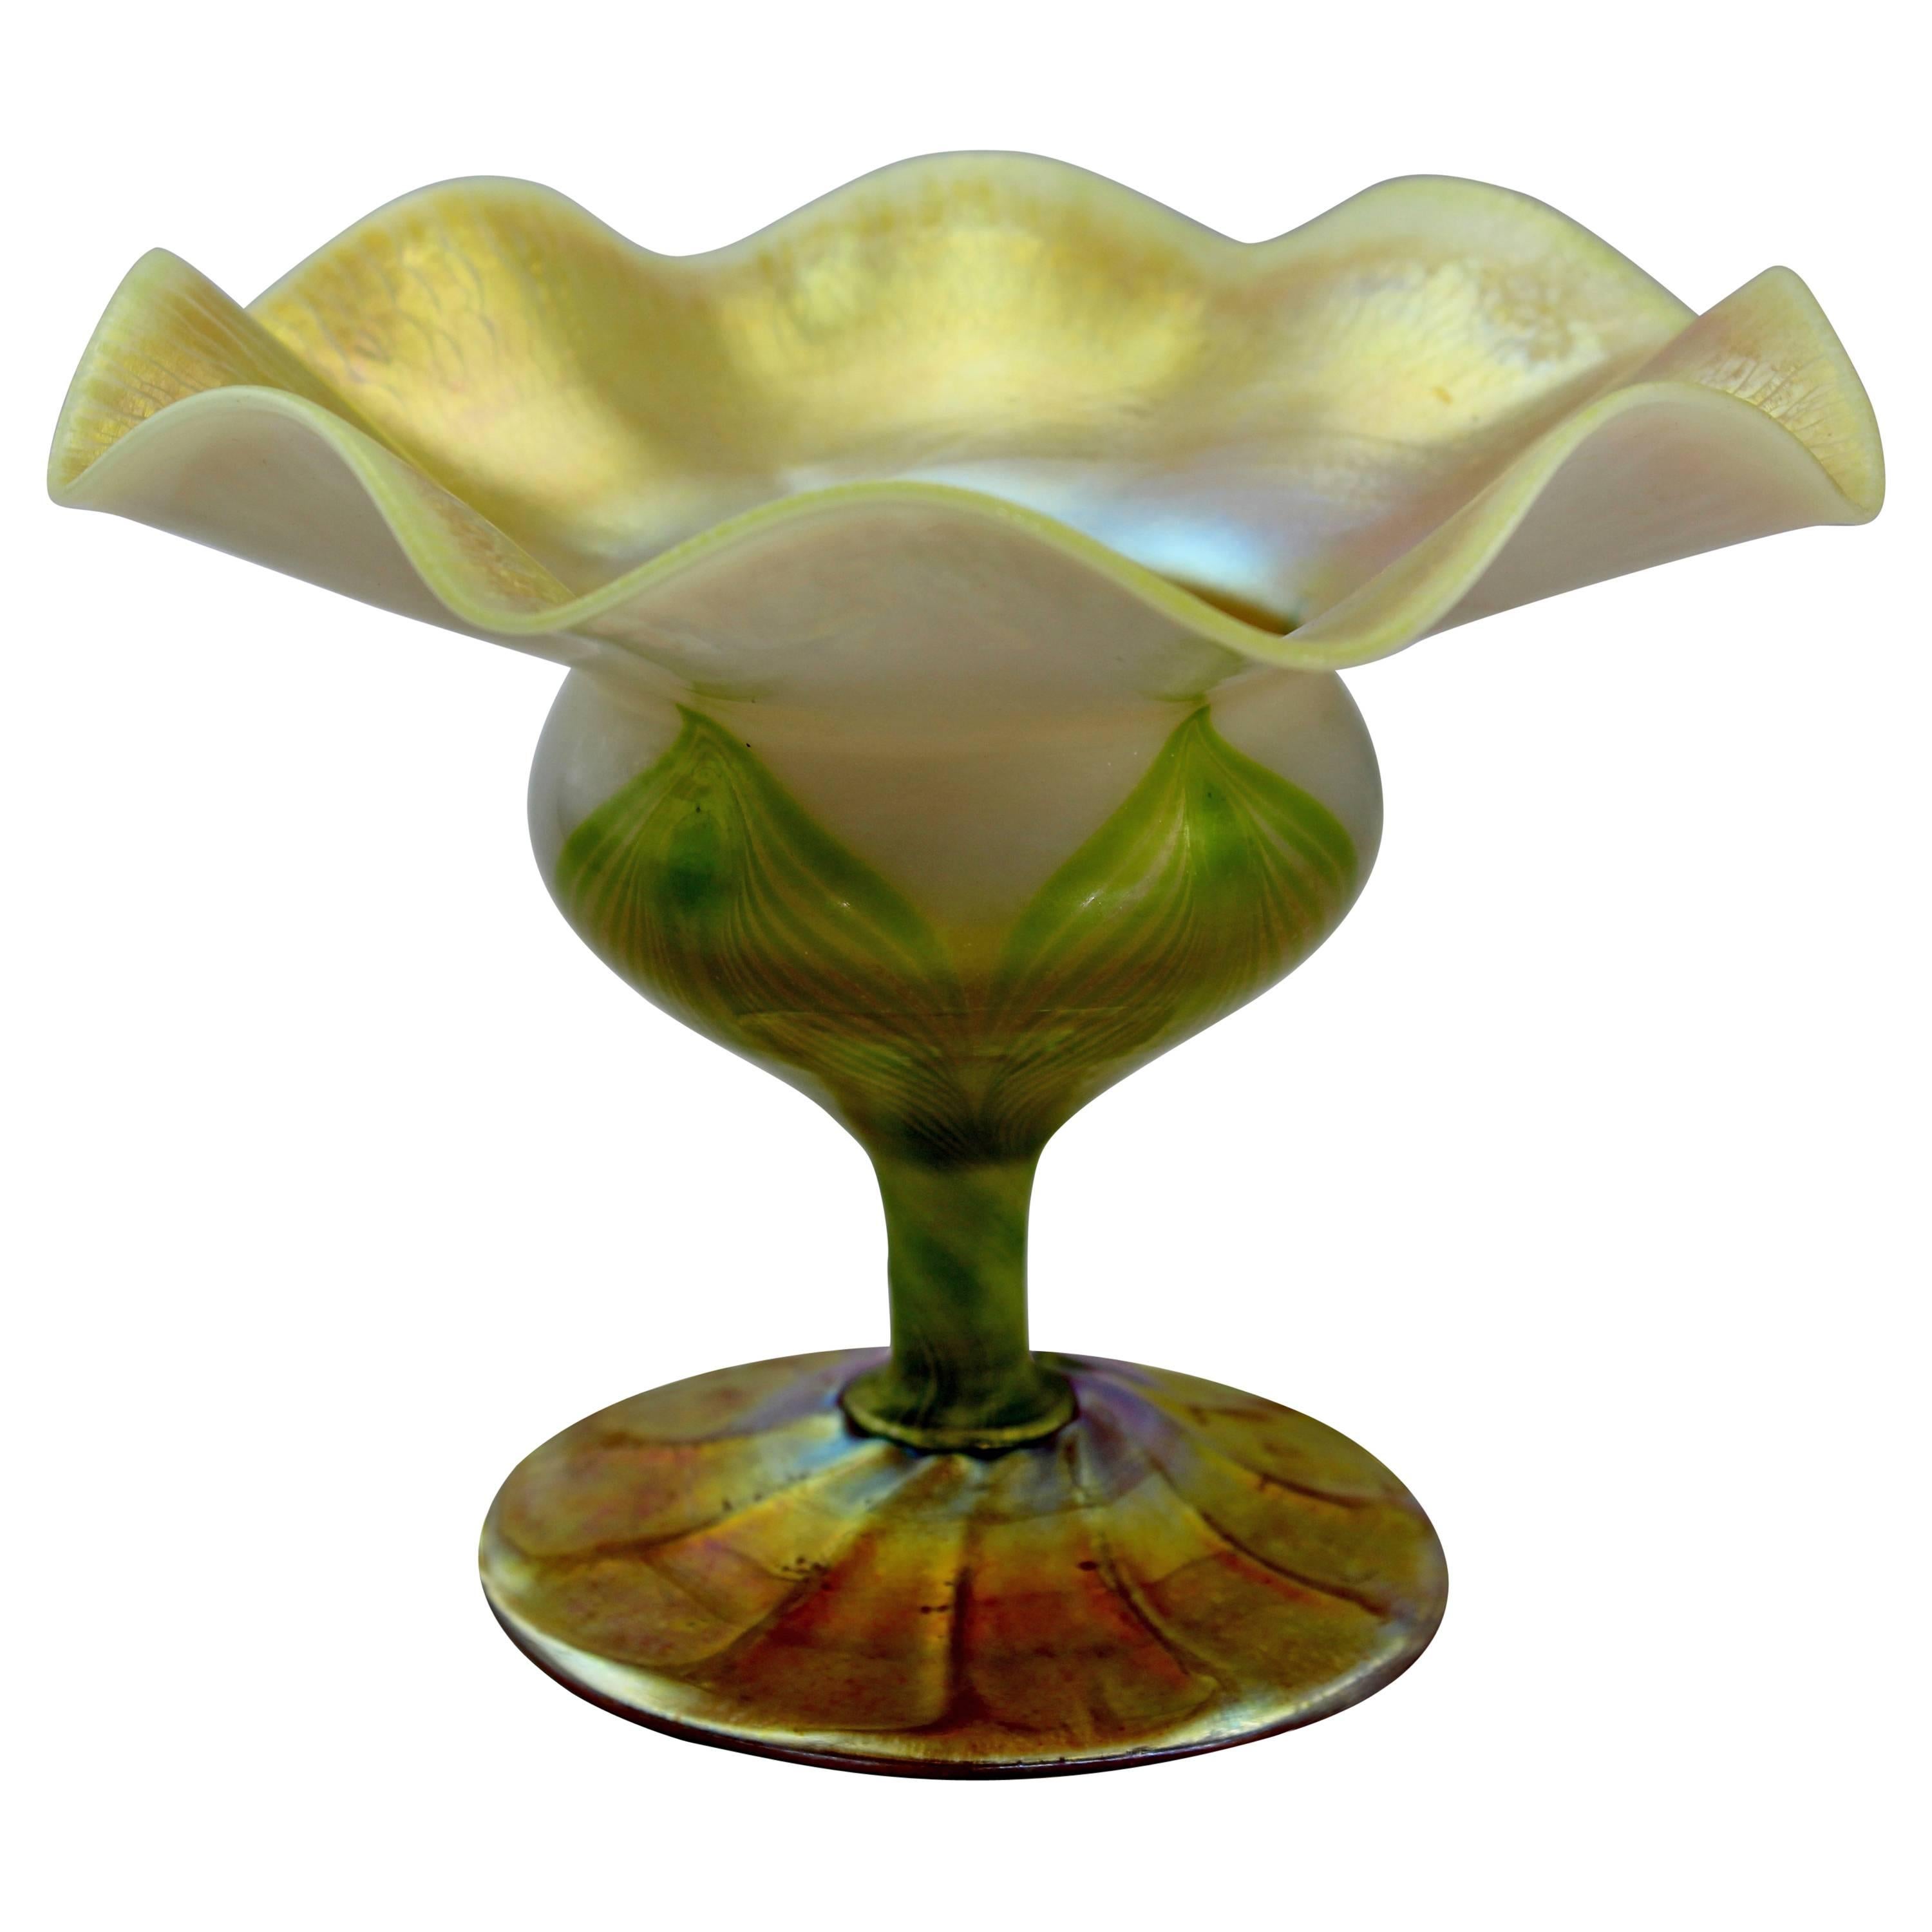 Tiffany Studios Feather-Pulled Gold Favrile Glass Floriform Vase